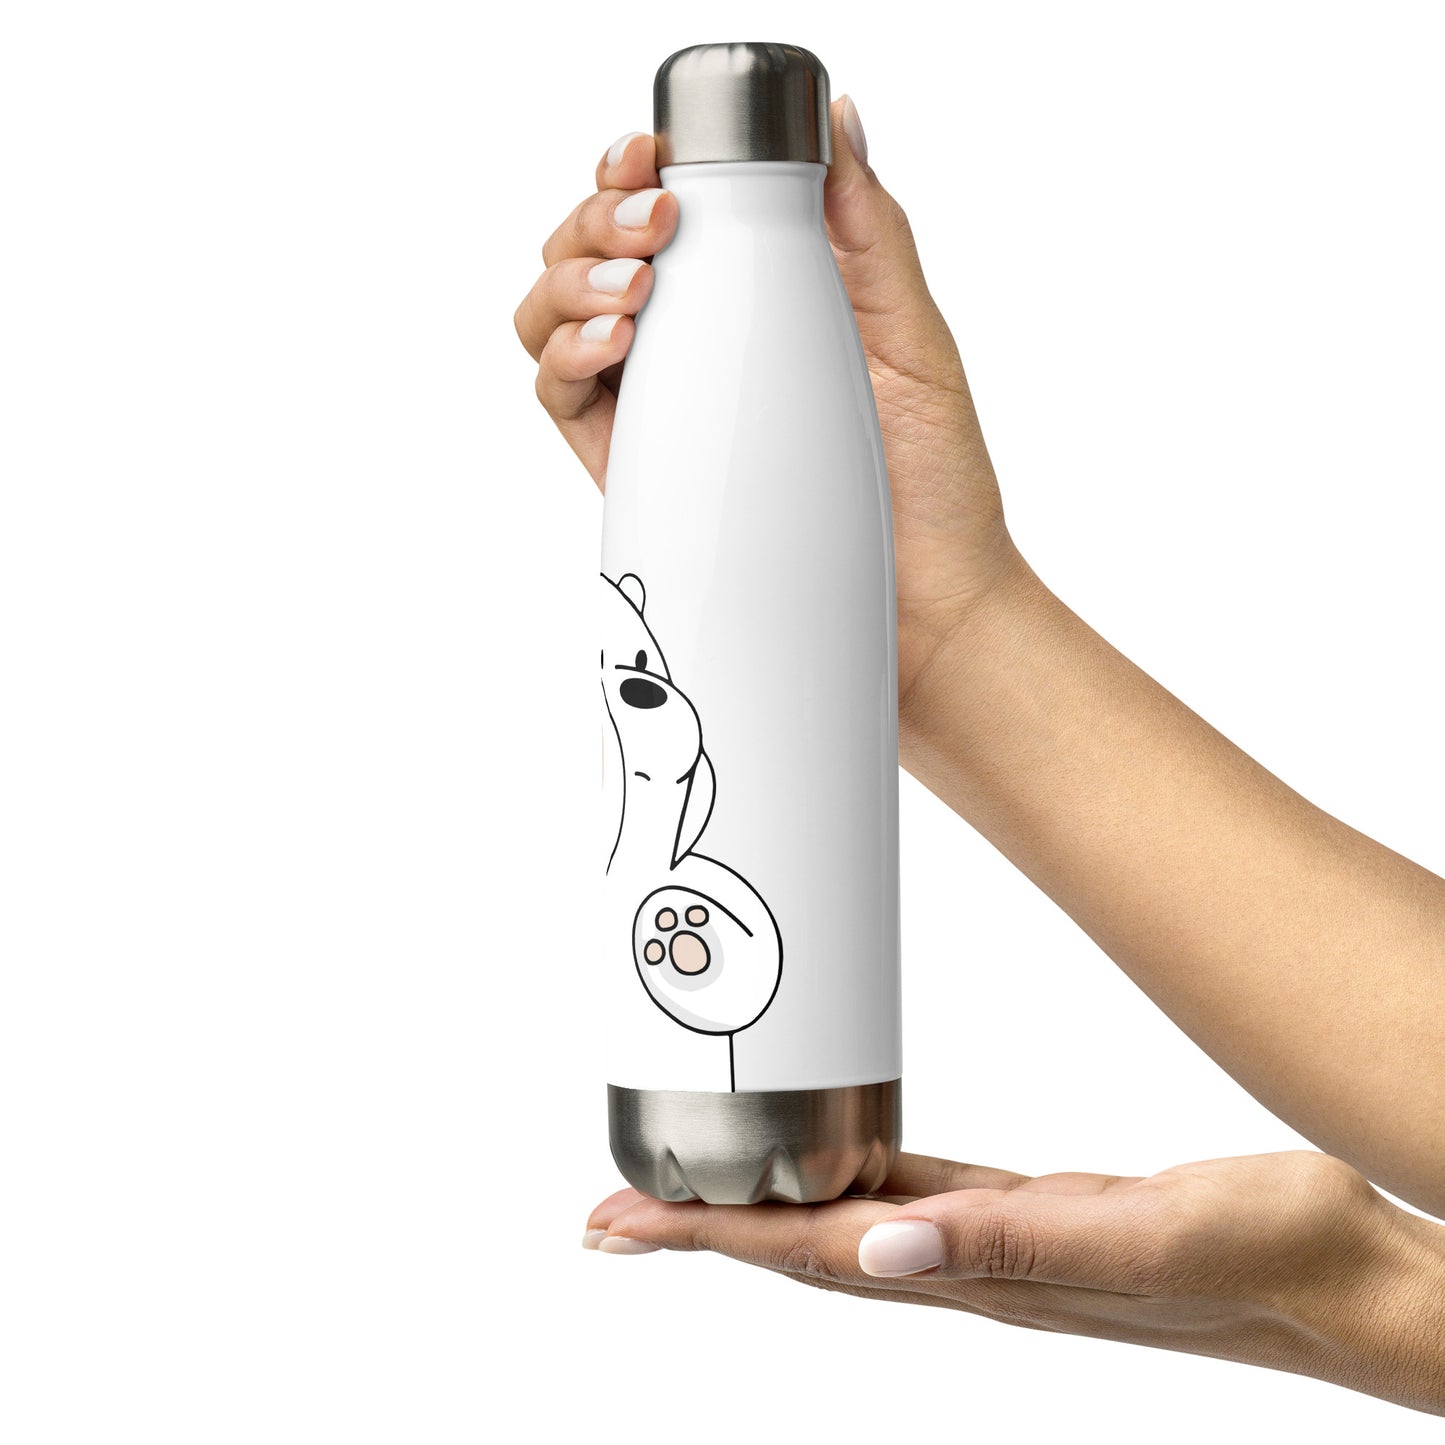 Stainless steel water bottle with Cute Polar Bear Design